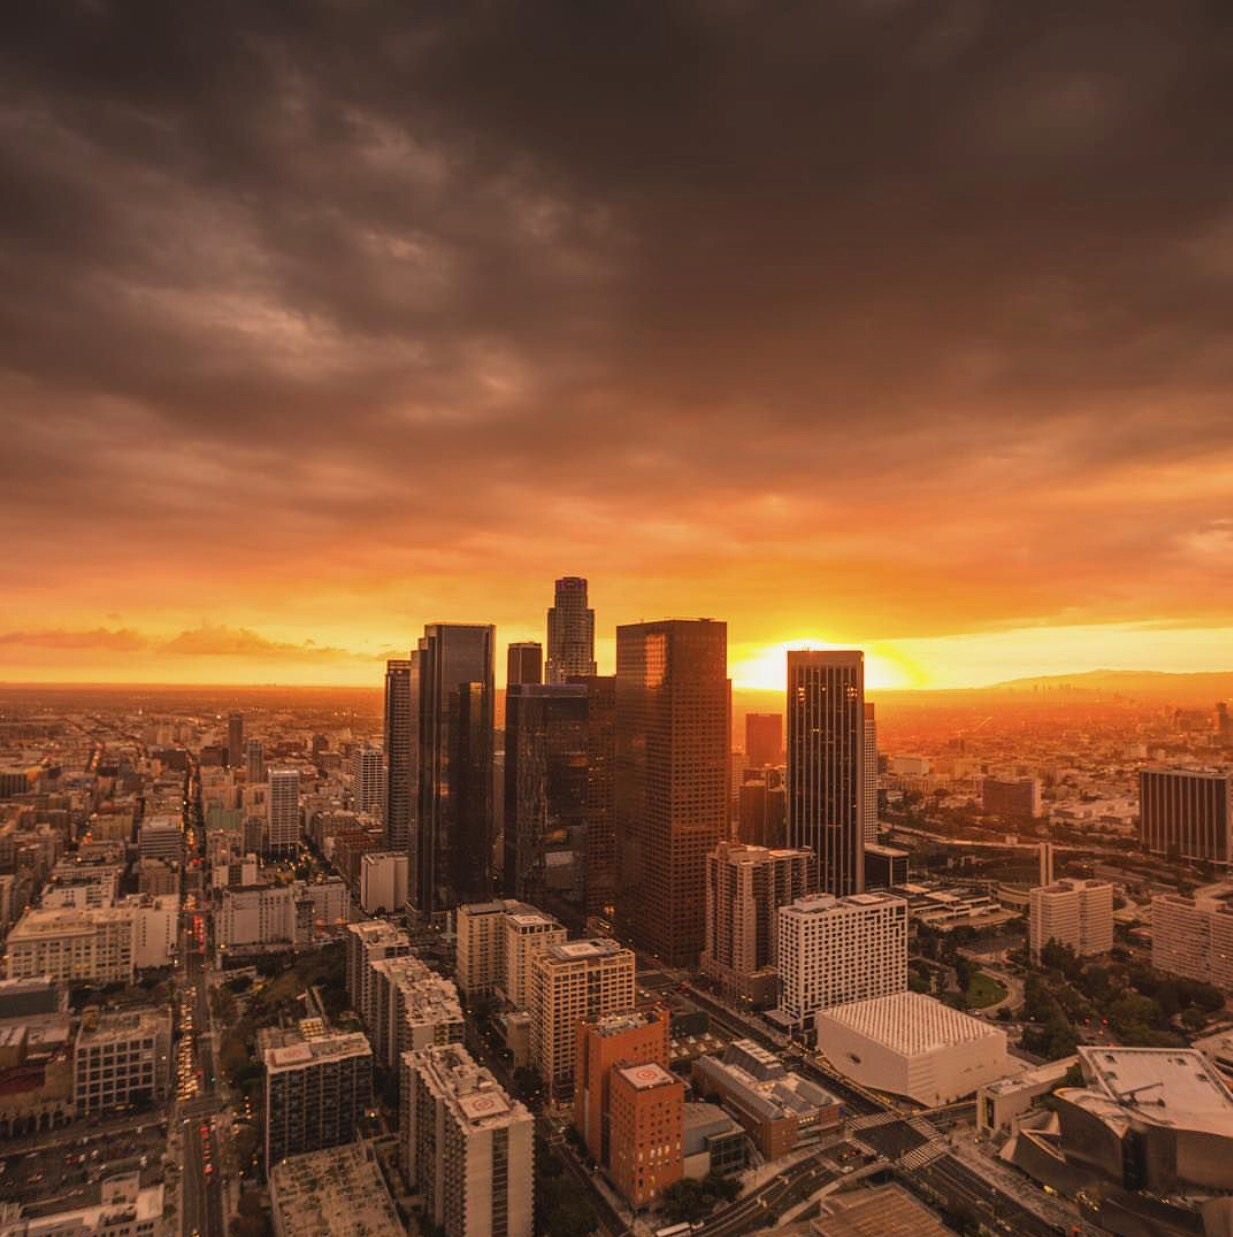 Downtown Los Angeles at sunset